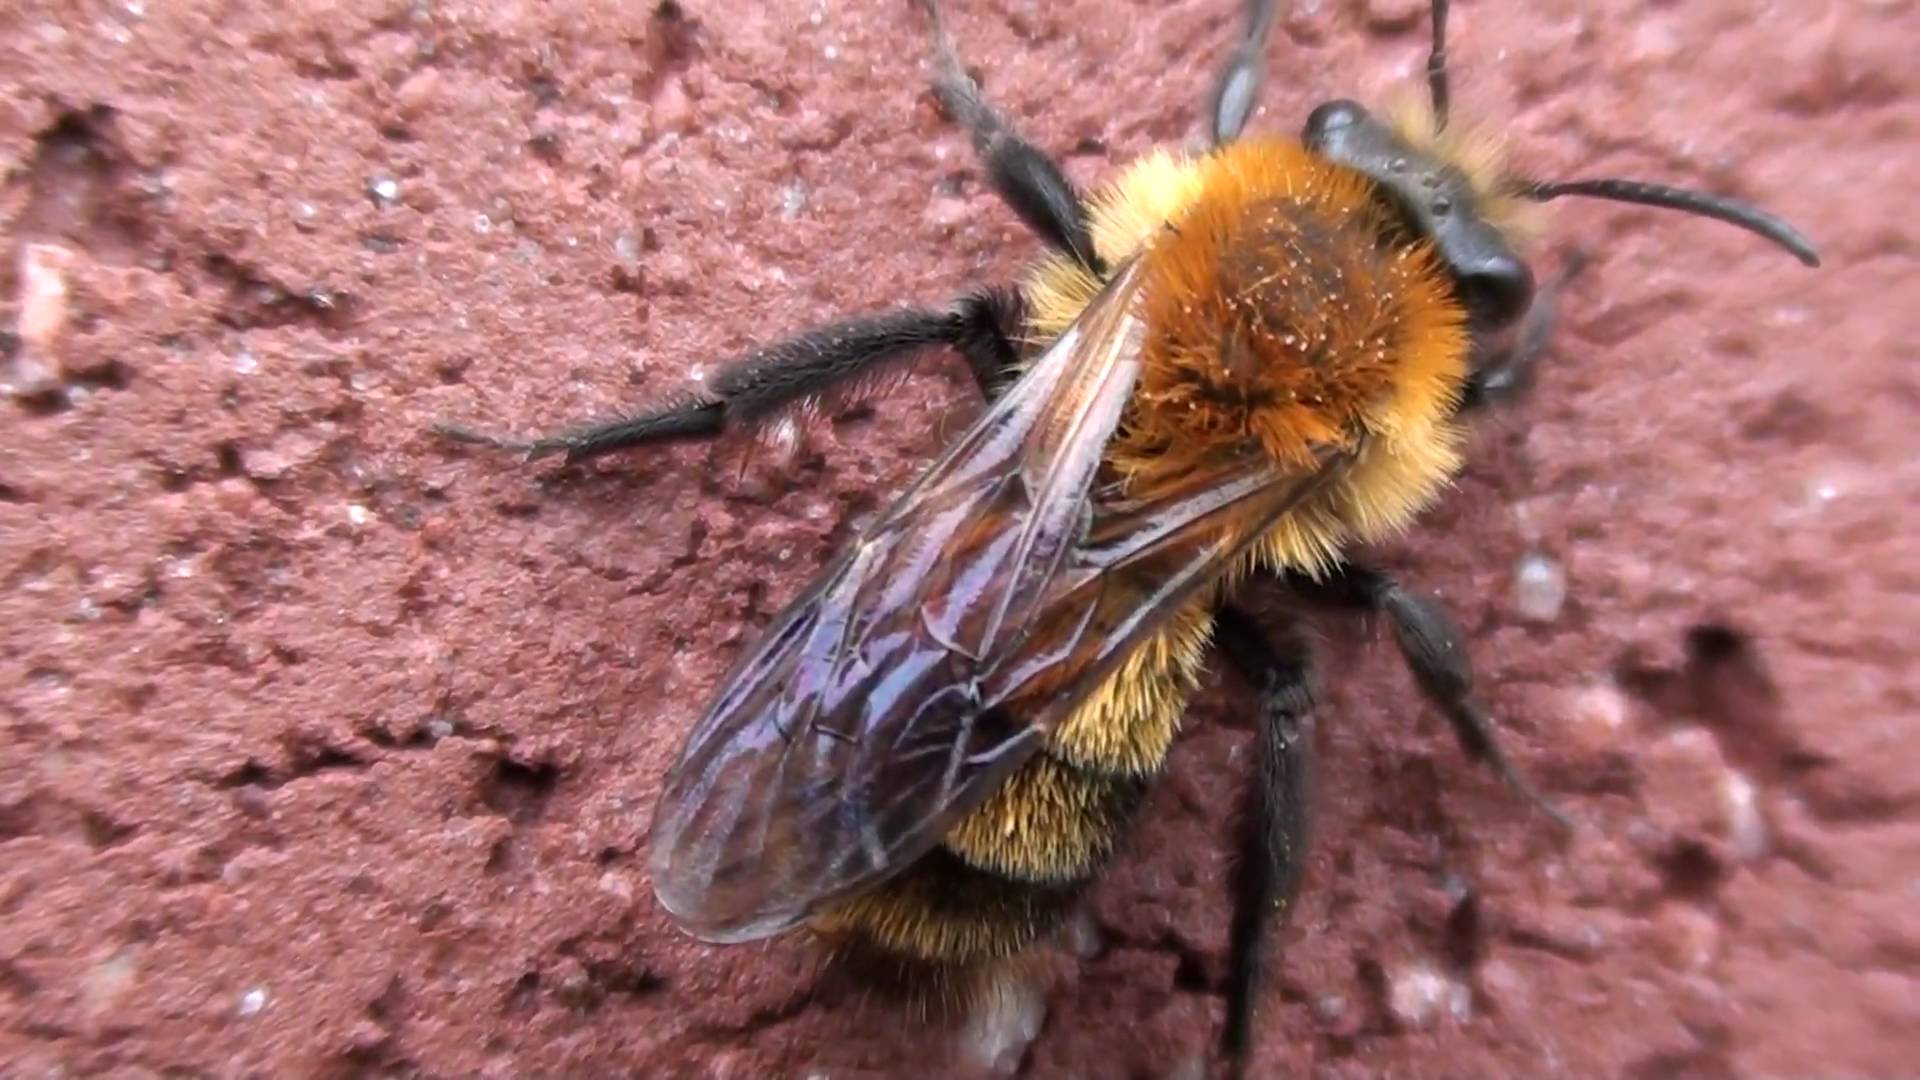 Plasterer Bee (Colletidae: Colletes) on Wall - YouTube